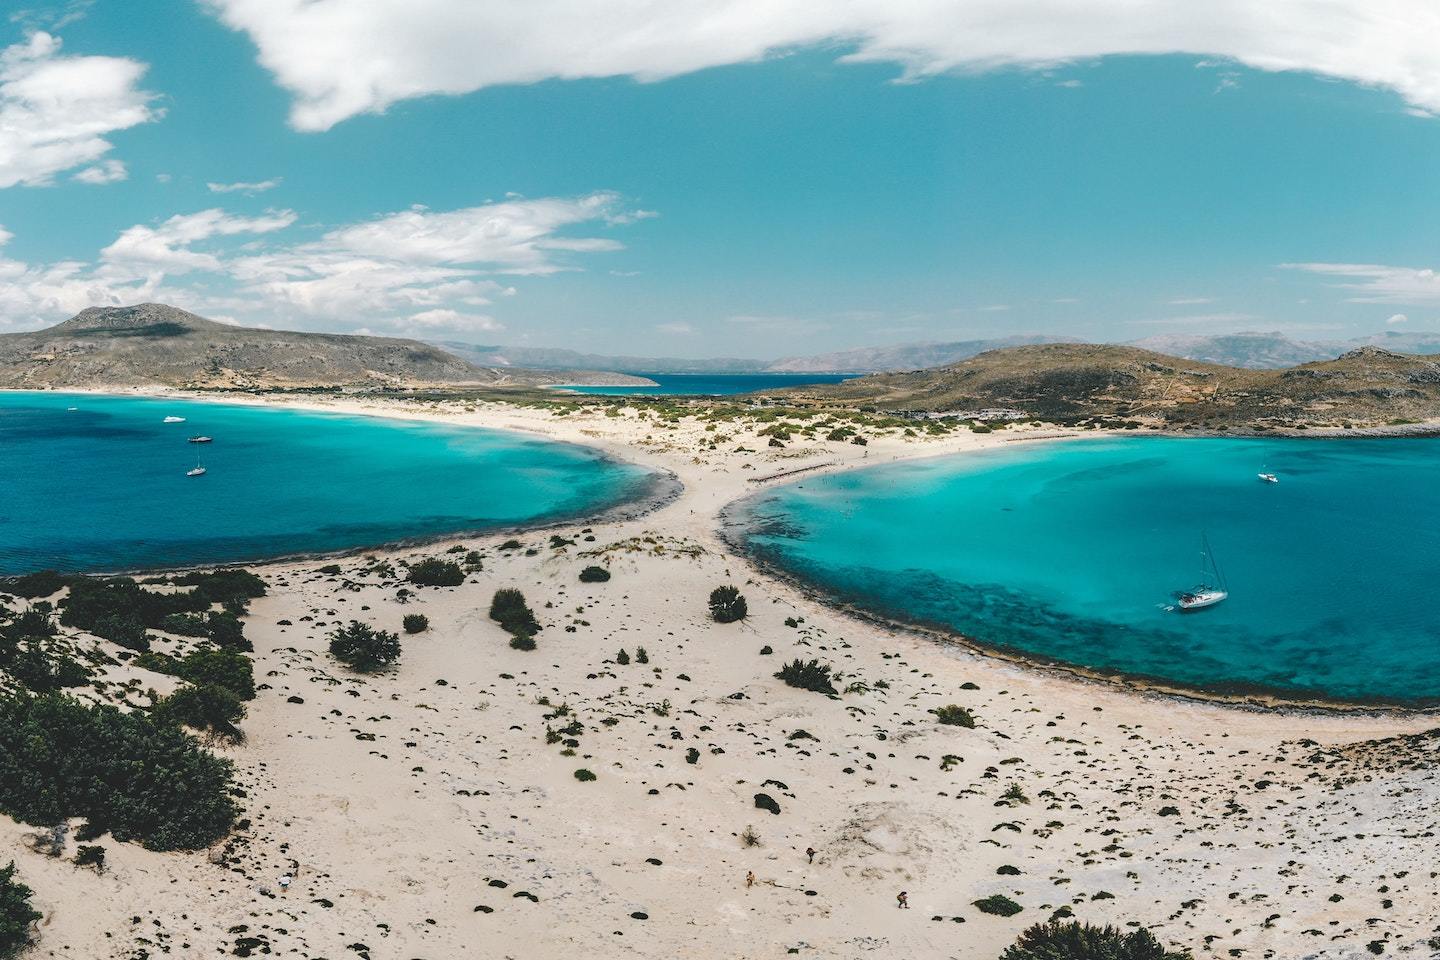 View of Simos Beach in Greece with water on both sides connected by a strip of sand